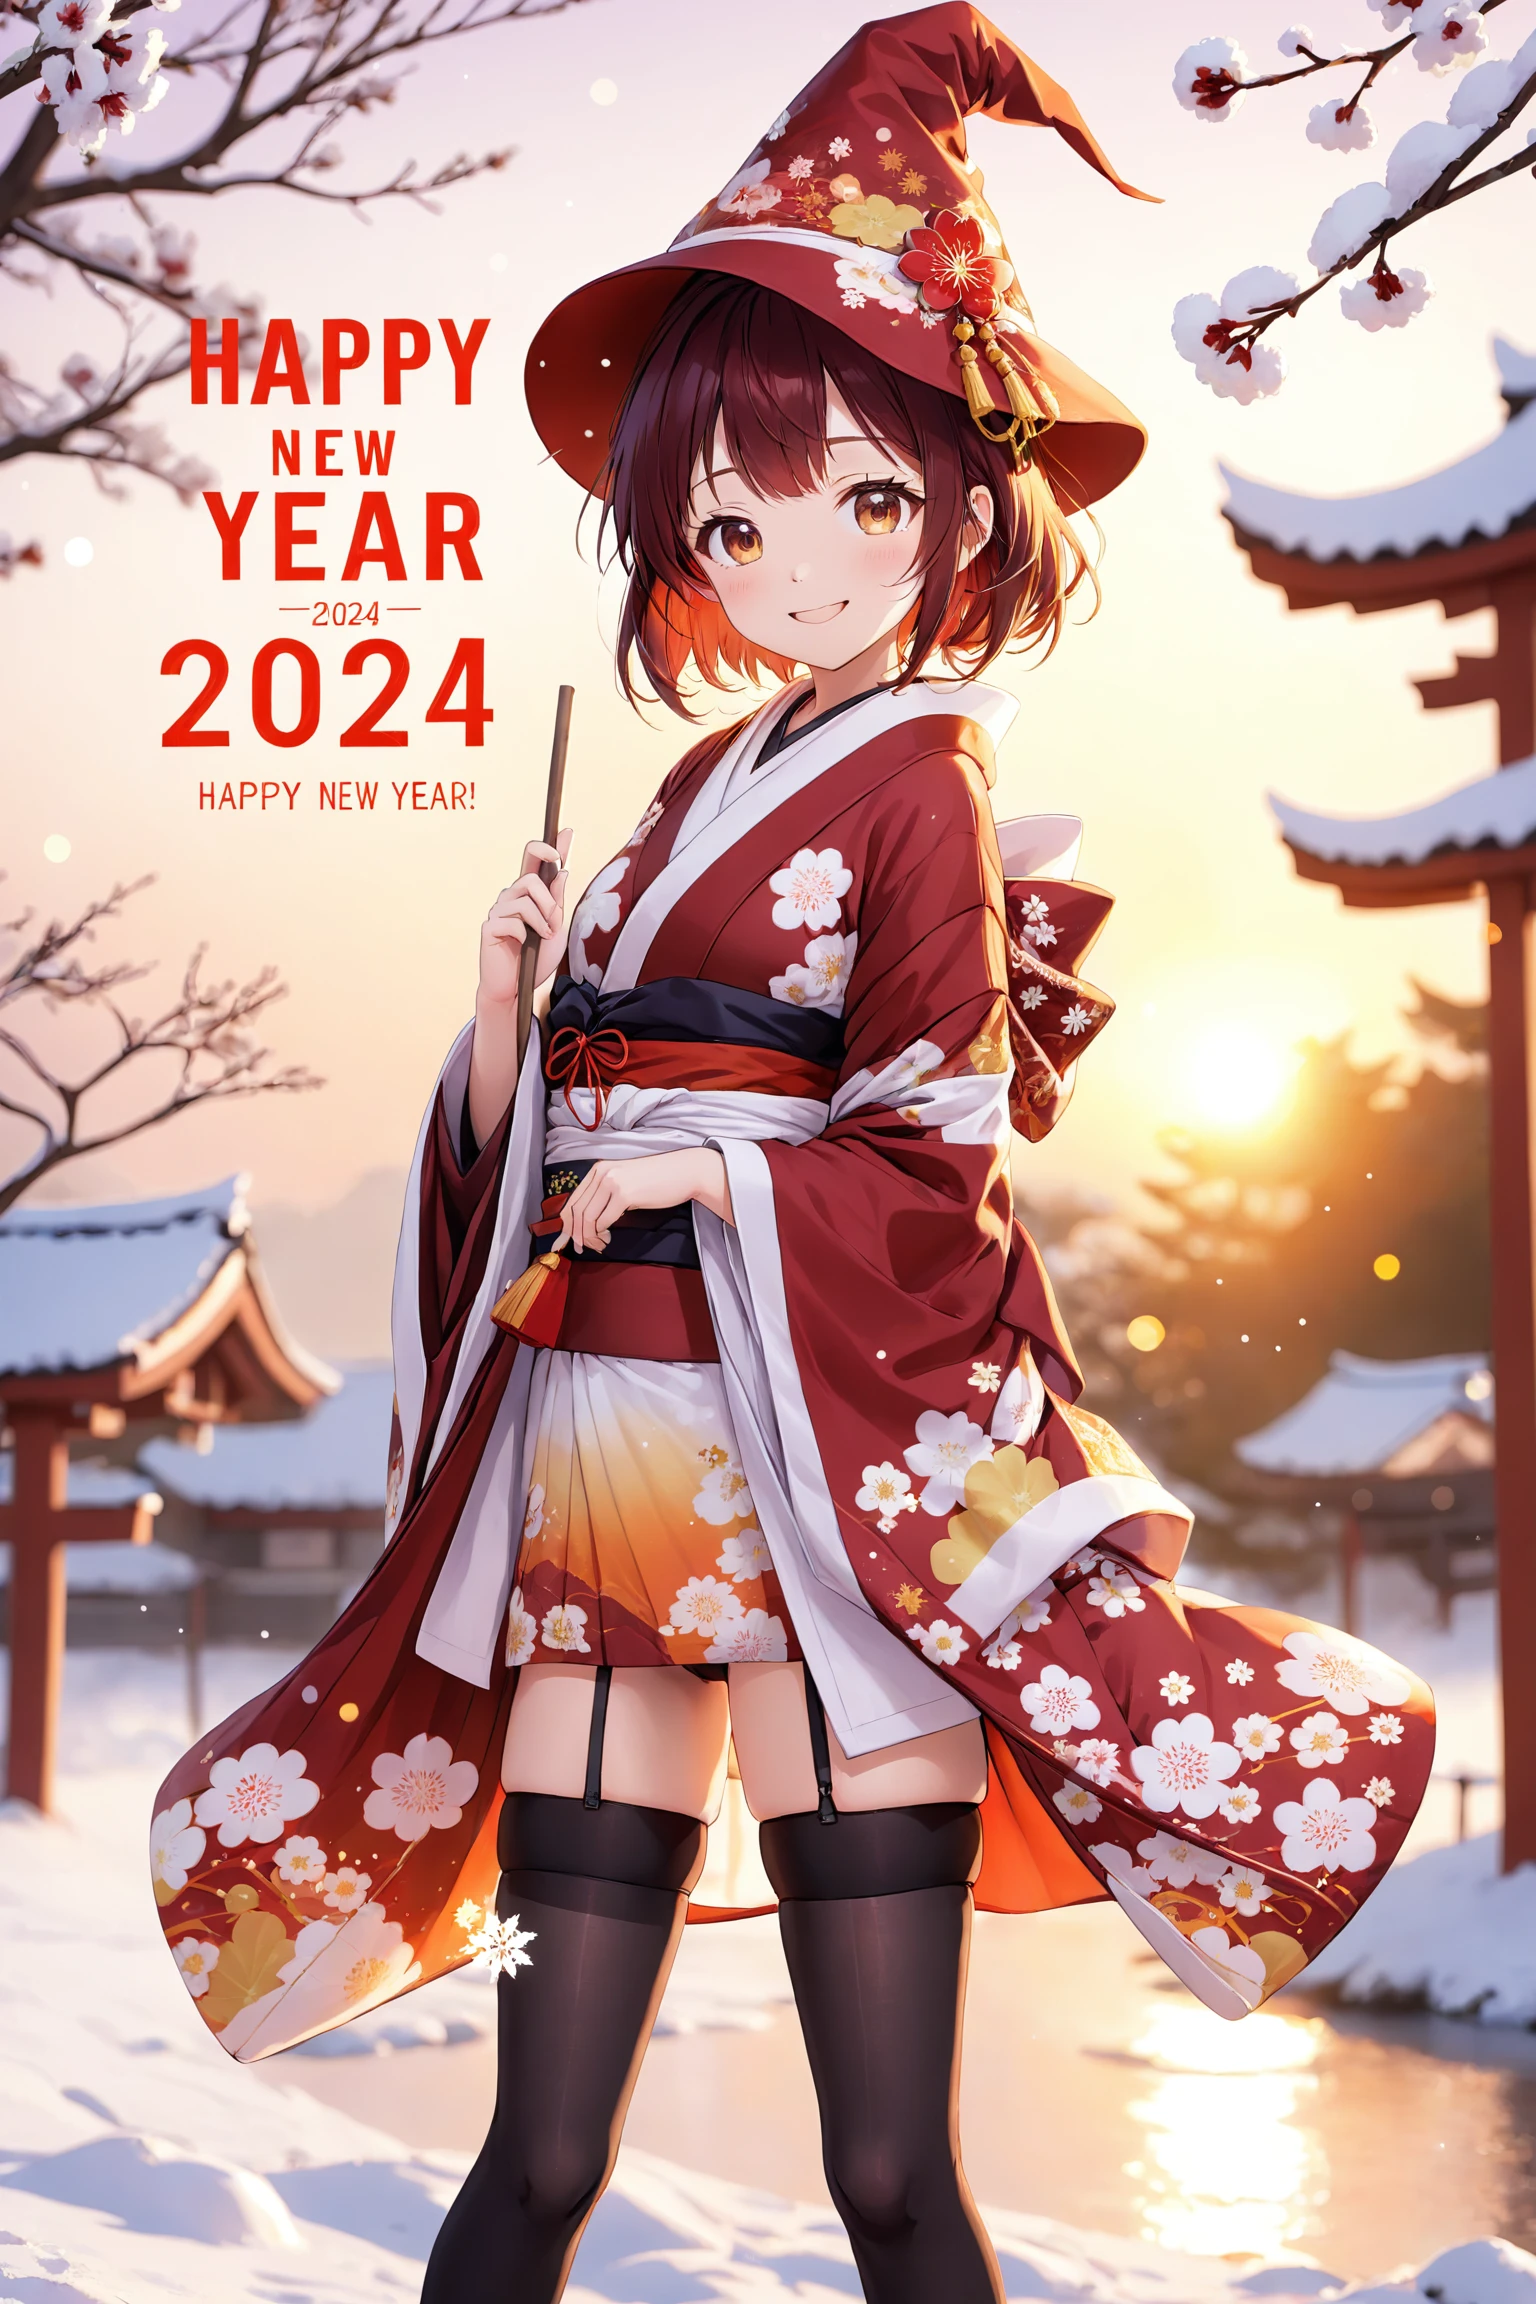 anime, cute girl, wizard hat, kimono, thigh-highs, happy, dynamic pose, "HAPPY NEW YEAR!", 2024, pop font, landscape, sunr...